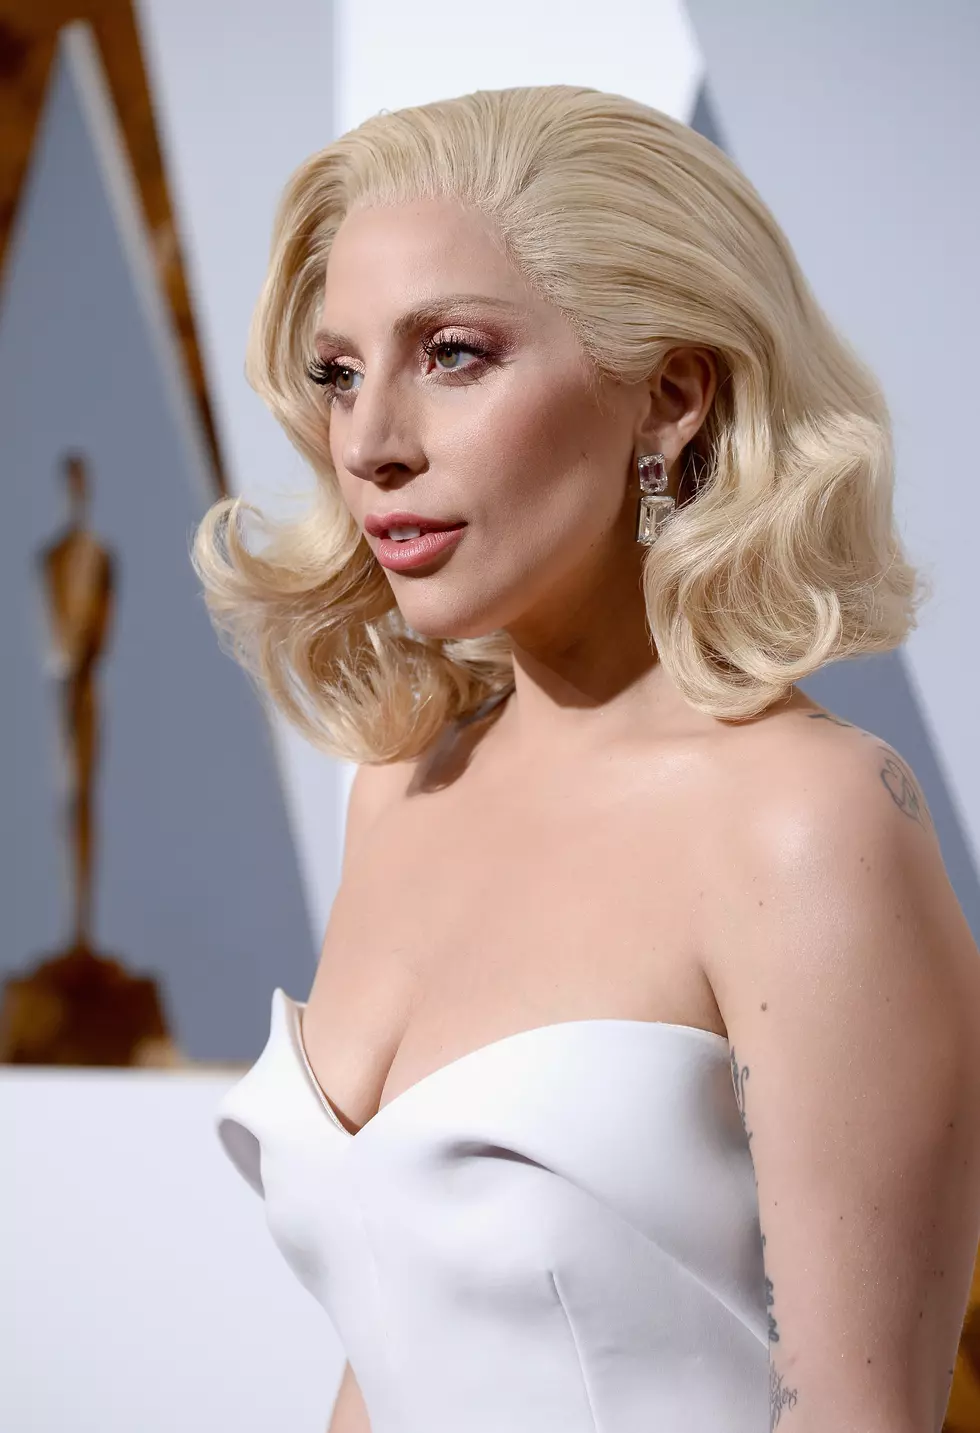 Lady Gaga’s Inspirational ’Til It Happens to You&#8217; Oscar Performance